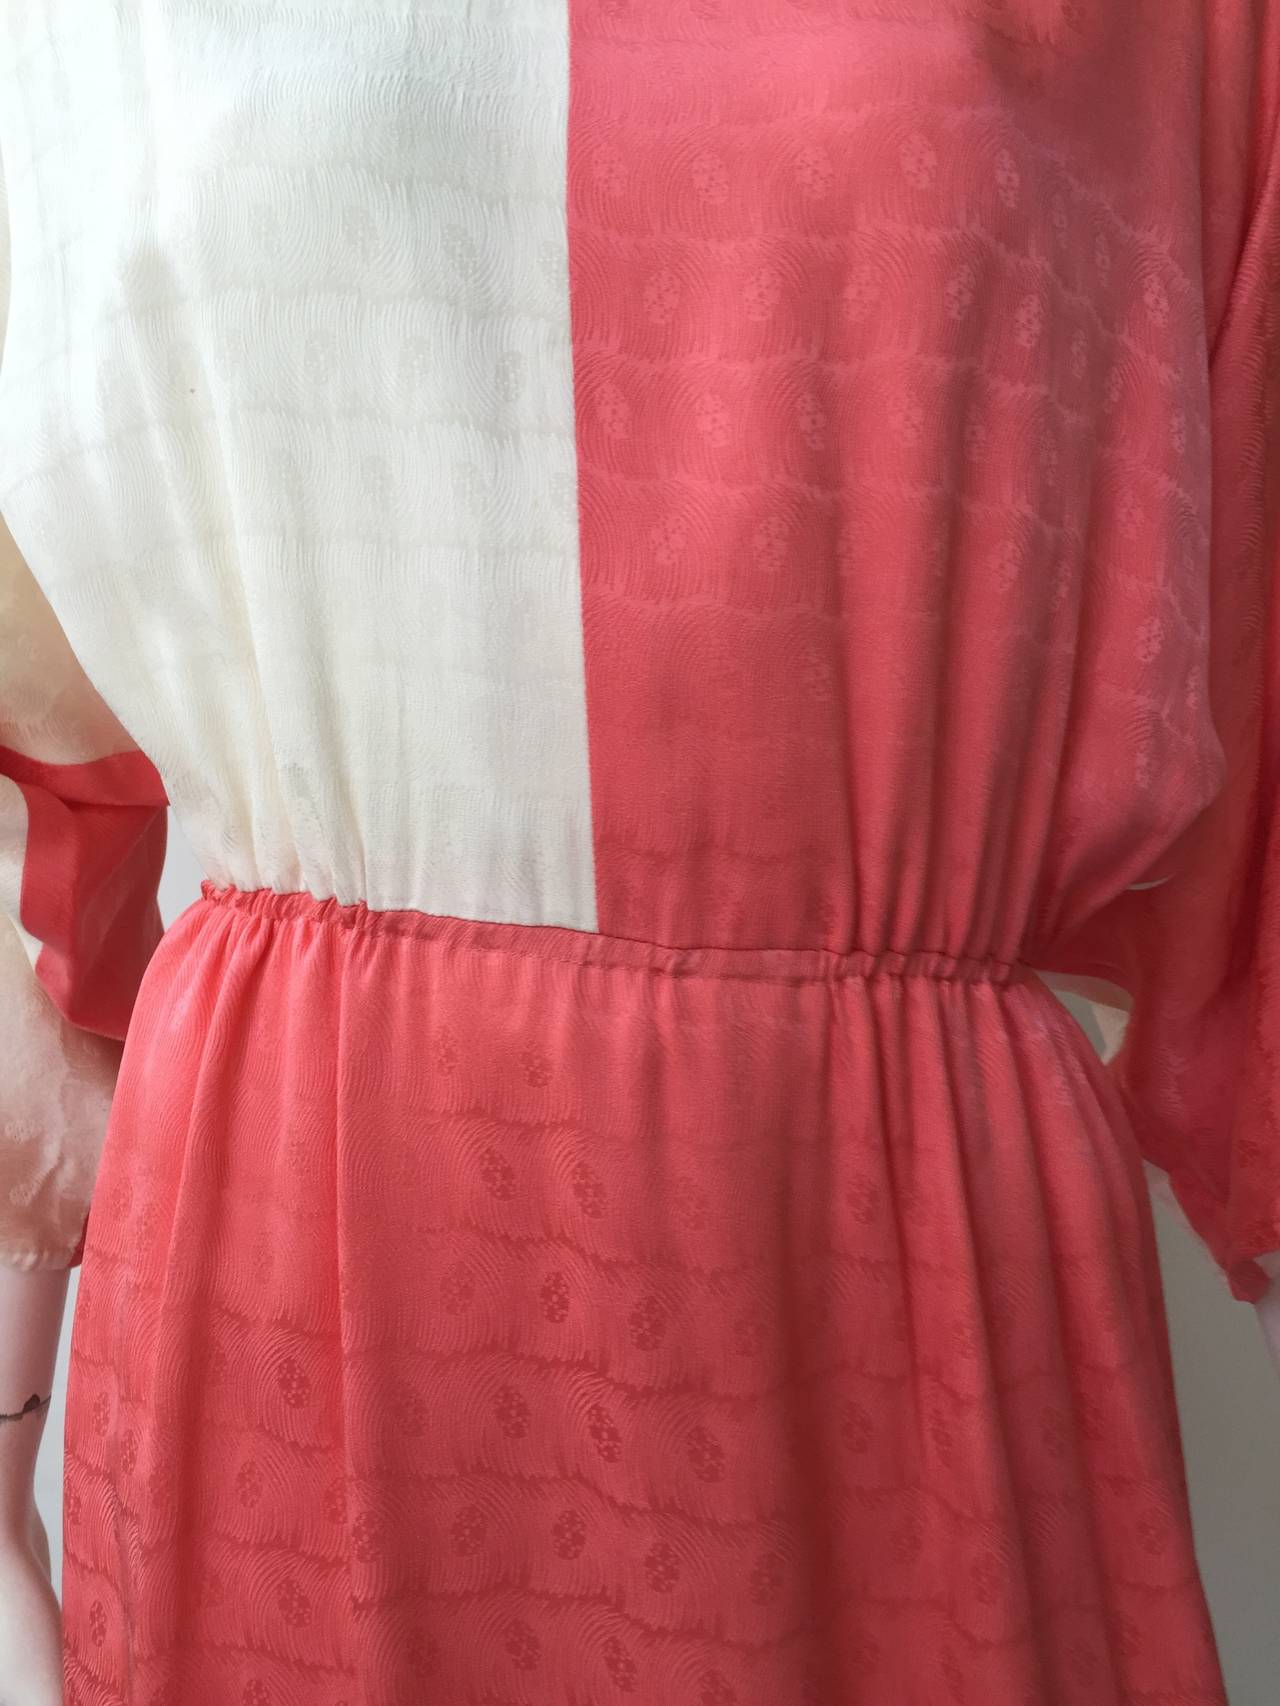 Mr. Blackwell 1950s Silk Dress Dolman Sleeves Size 8. In Good Condition For Sale In Atlanta, GA